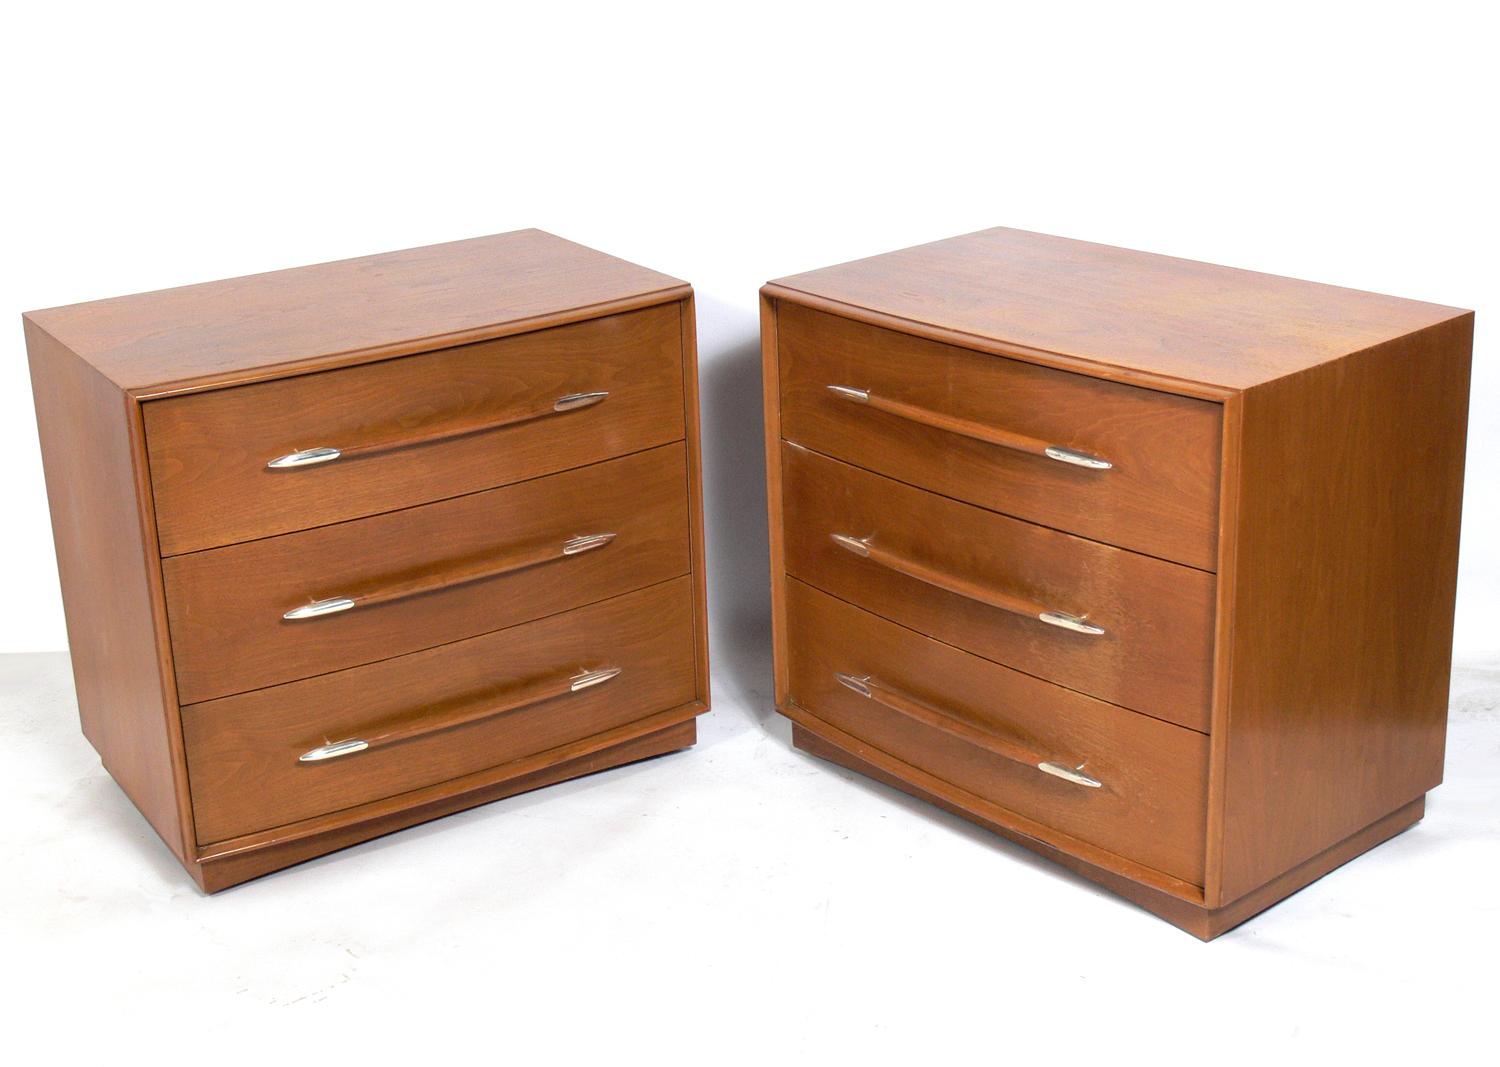 Modernist chests or dressers, designed by T.H. Robsjohn Gibbings for Widdicomb, American, circa 1950s. They are priced at $2400 each or $4500 for the pair. They retain their original finish with warm original patina. If you would prefer them